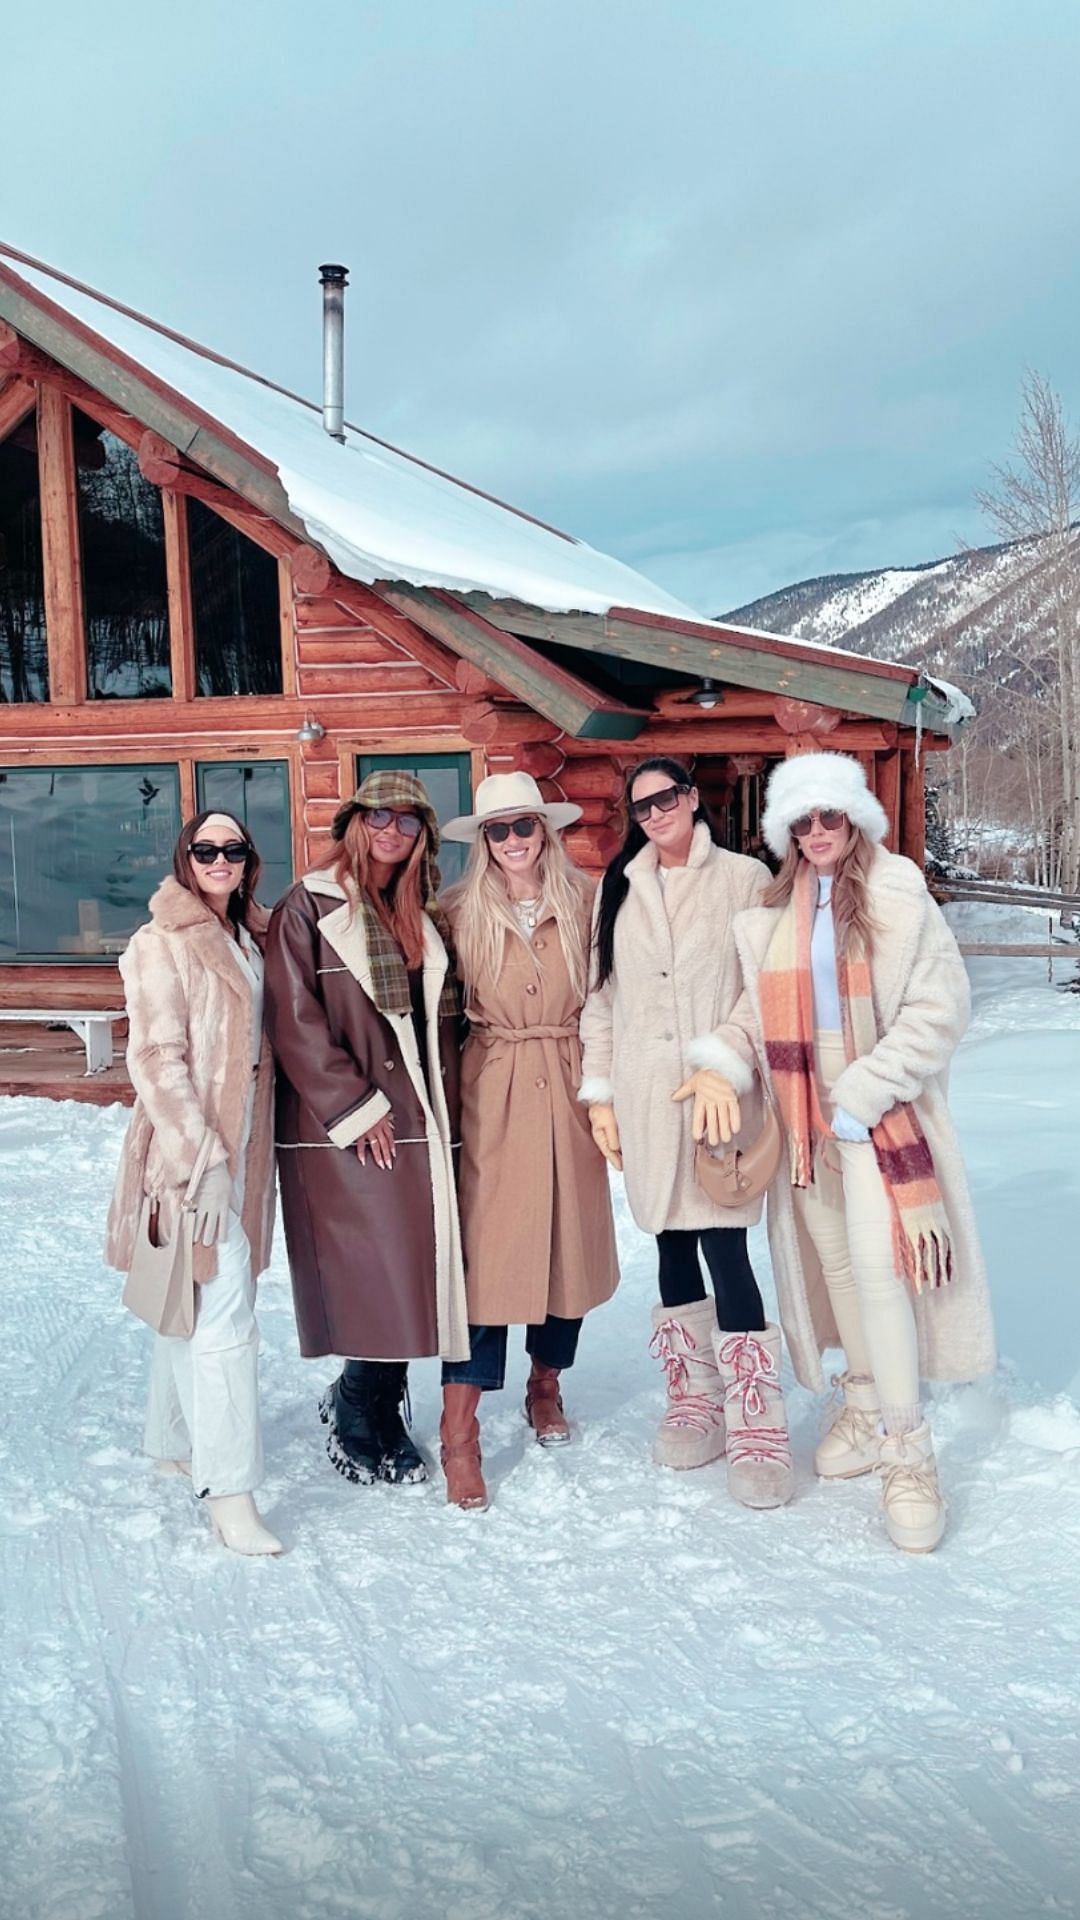 Kayla Nicole and Claire Kittle with friends in Aspen